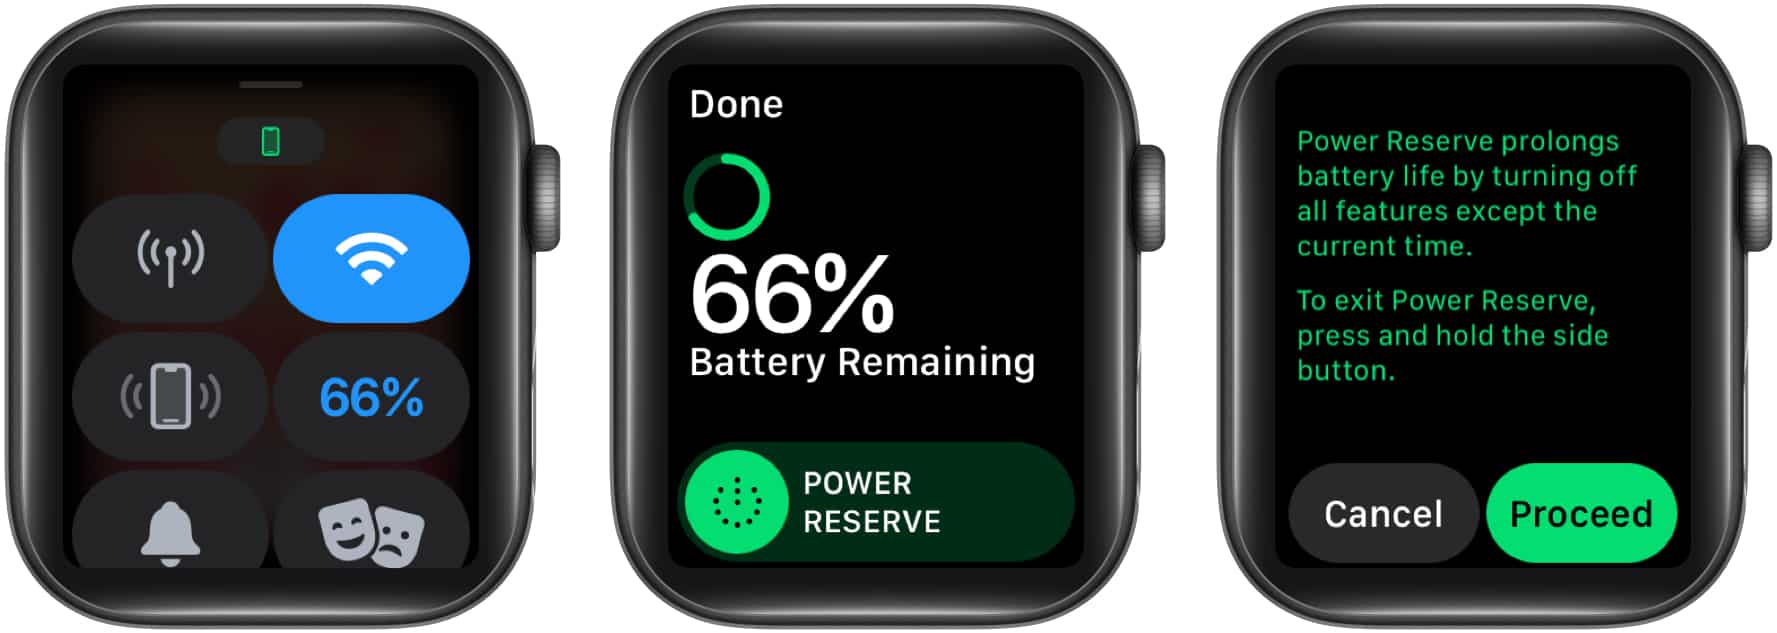 turn on power reserve mode on Apple watch